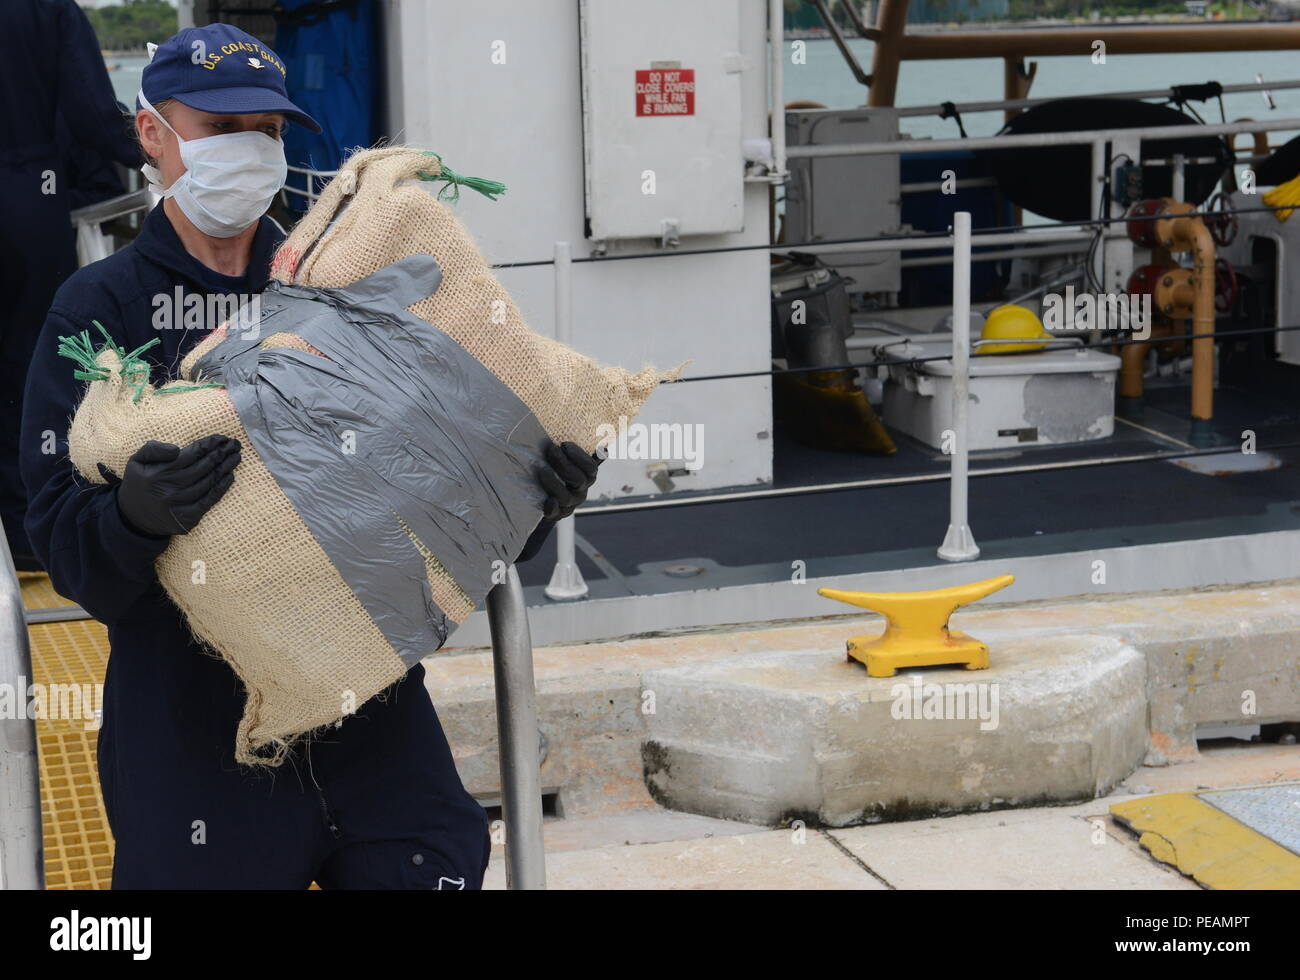 A Coast Guardsman offloads cocaine at Coast Guard Sector Miami Beach, Fla., Nov. 20, 2015. The HNLMS Friesland, an offshore patrol vessel from the Royal Netherlands Navy, interdicted a go-fast vessel with four suspected smugglers and 22 bales of cocaine with an estimated wholesale value of $17 million. (U.S. Coast Guard photo by Petty Officer 2nd Class Mark Barney) Stock Photo